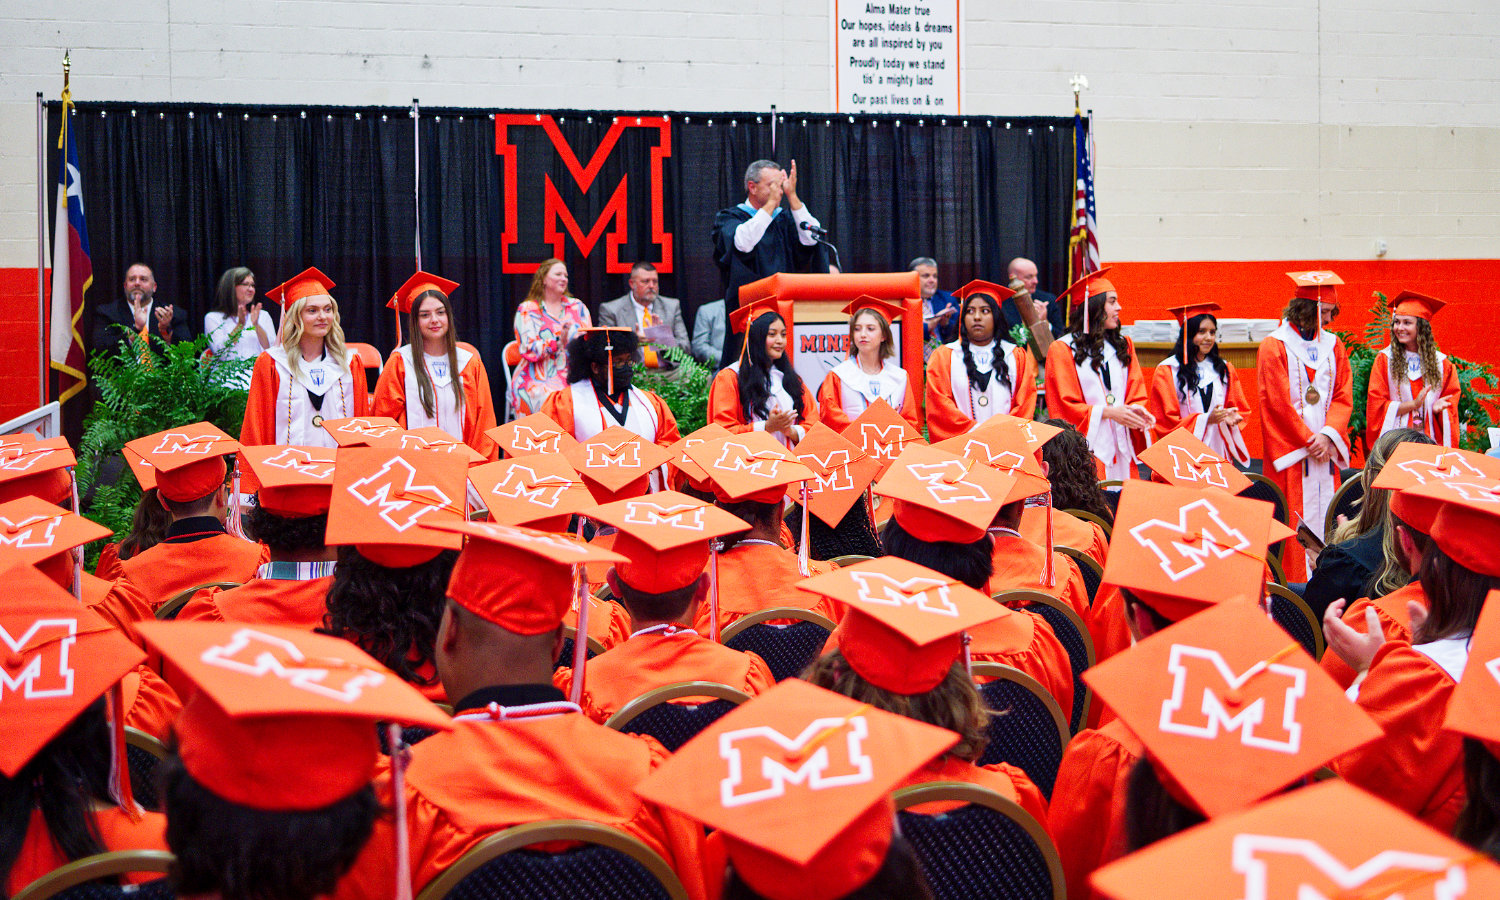 Mineola's top ten graduates are honored. [observe more orange, get grad gifts]